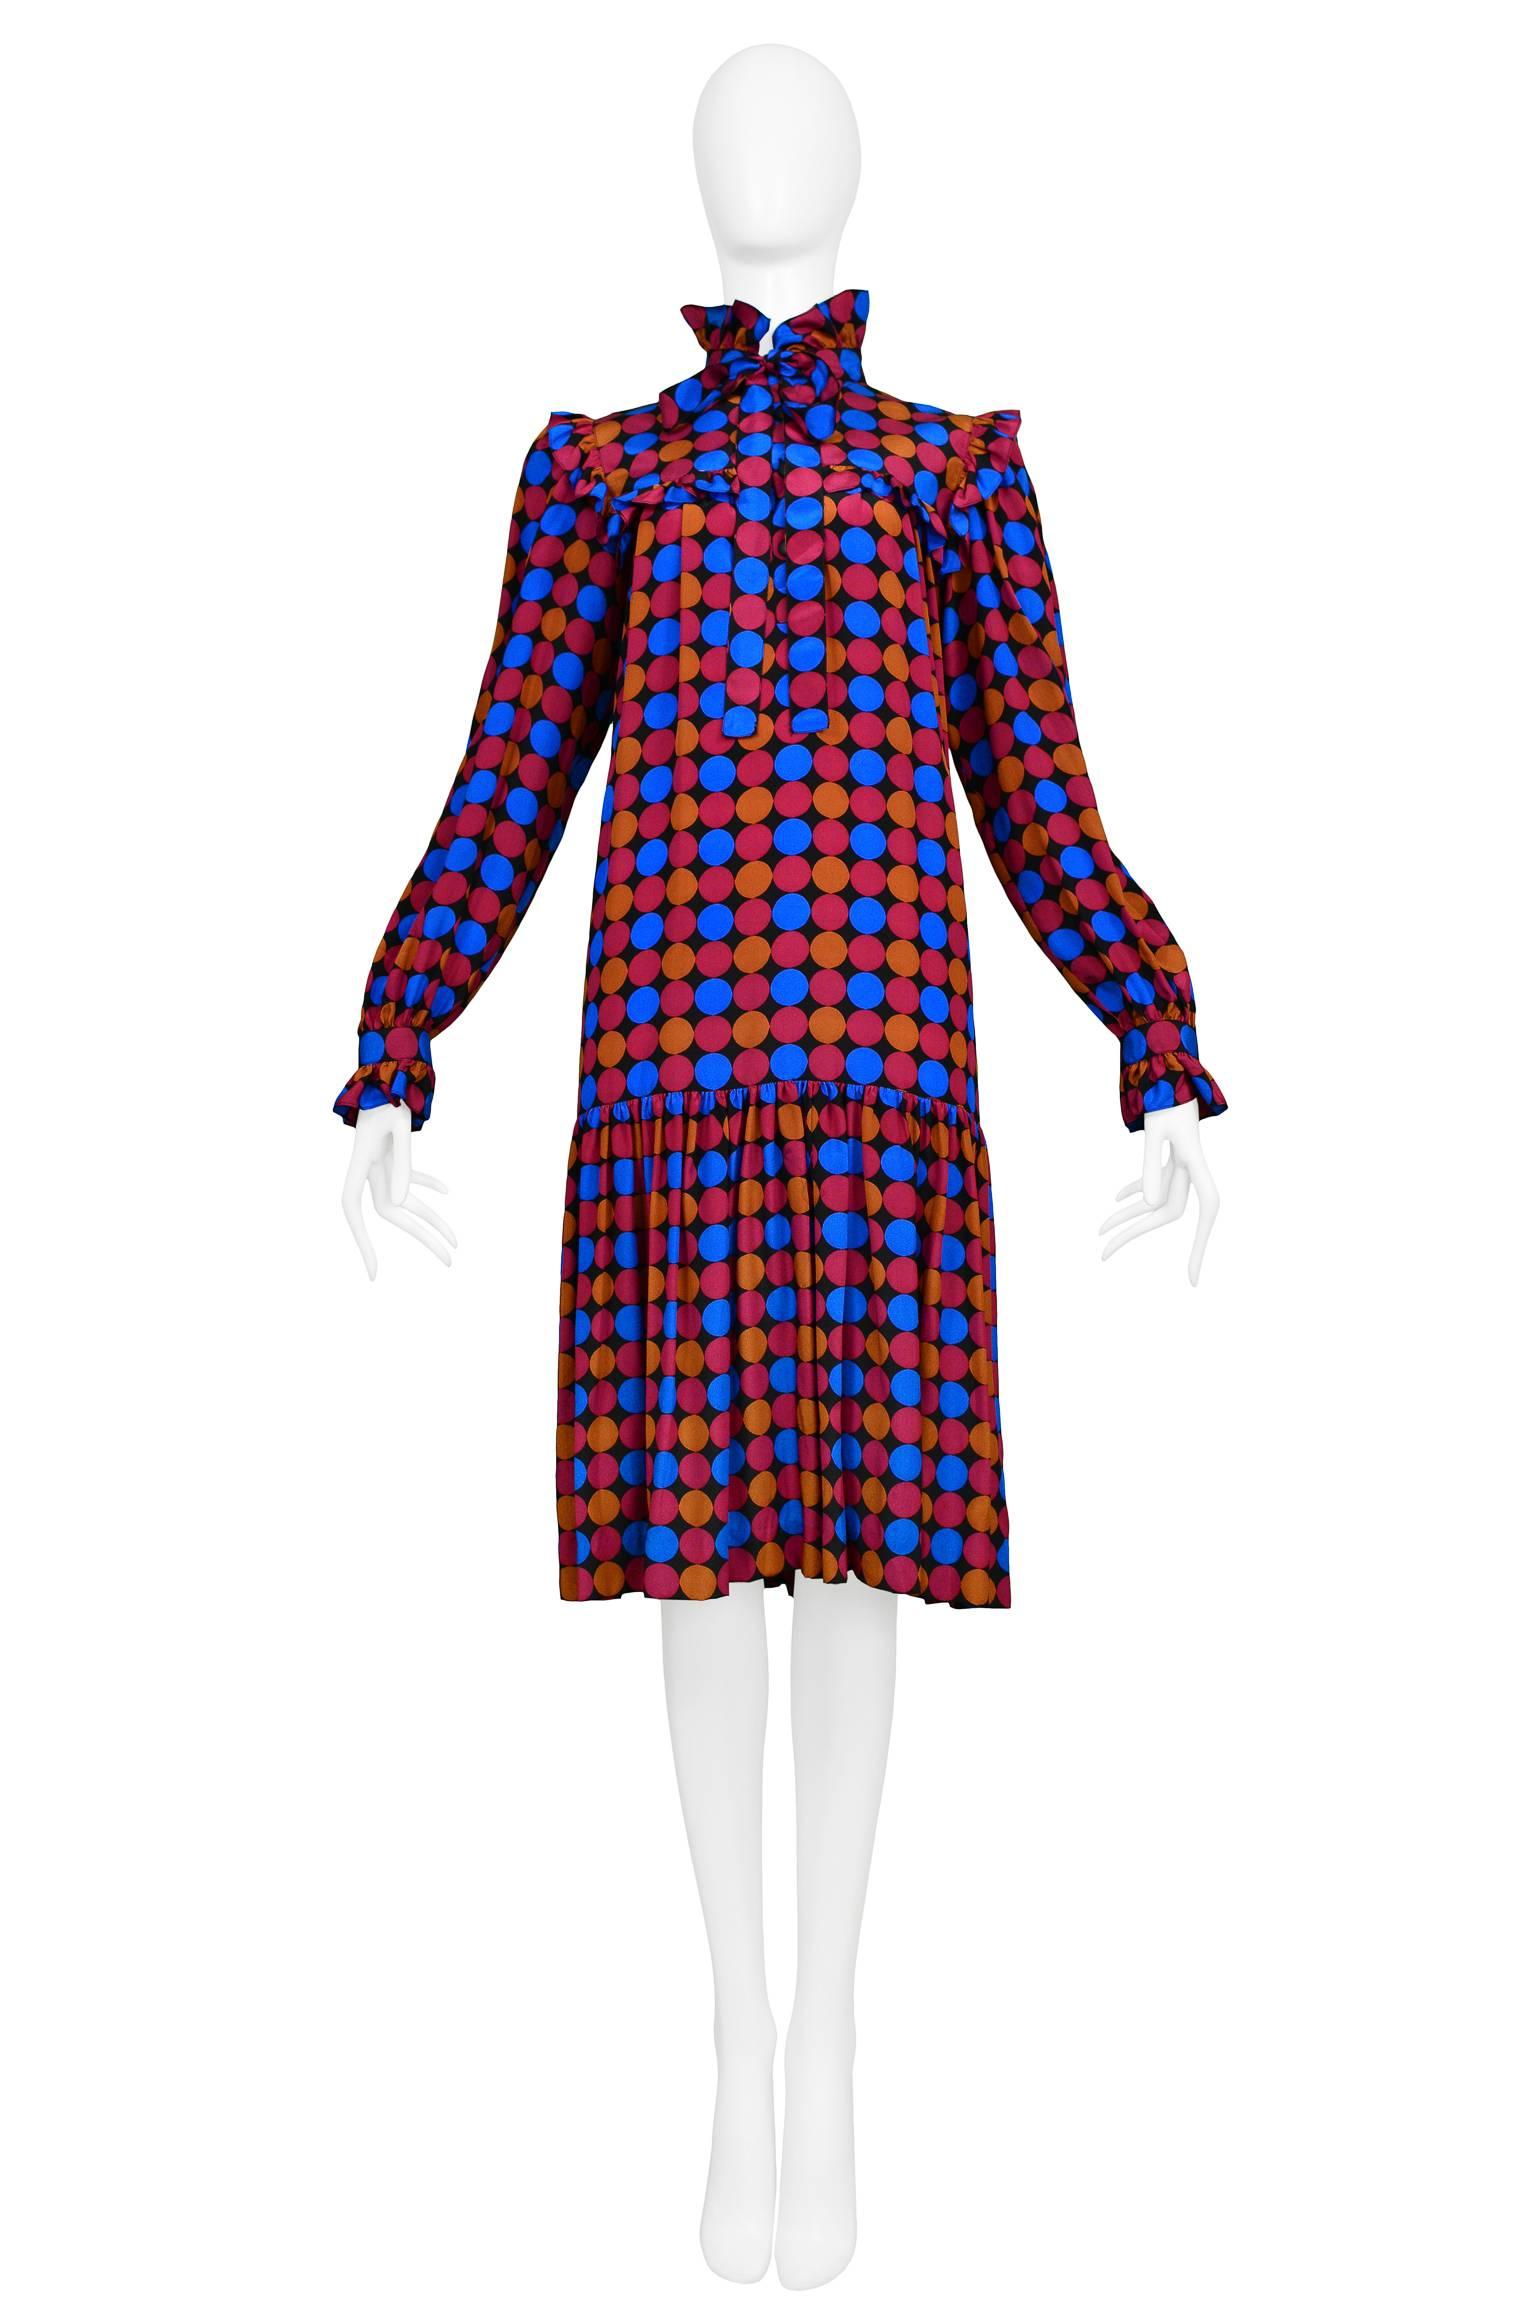 Vintage Yves Saint Laurent Day Dress featuring a drop waist, ruffle yolk and built in sash at the collar. The dress features an all over geo print of circles in magenta, blue and copper. 